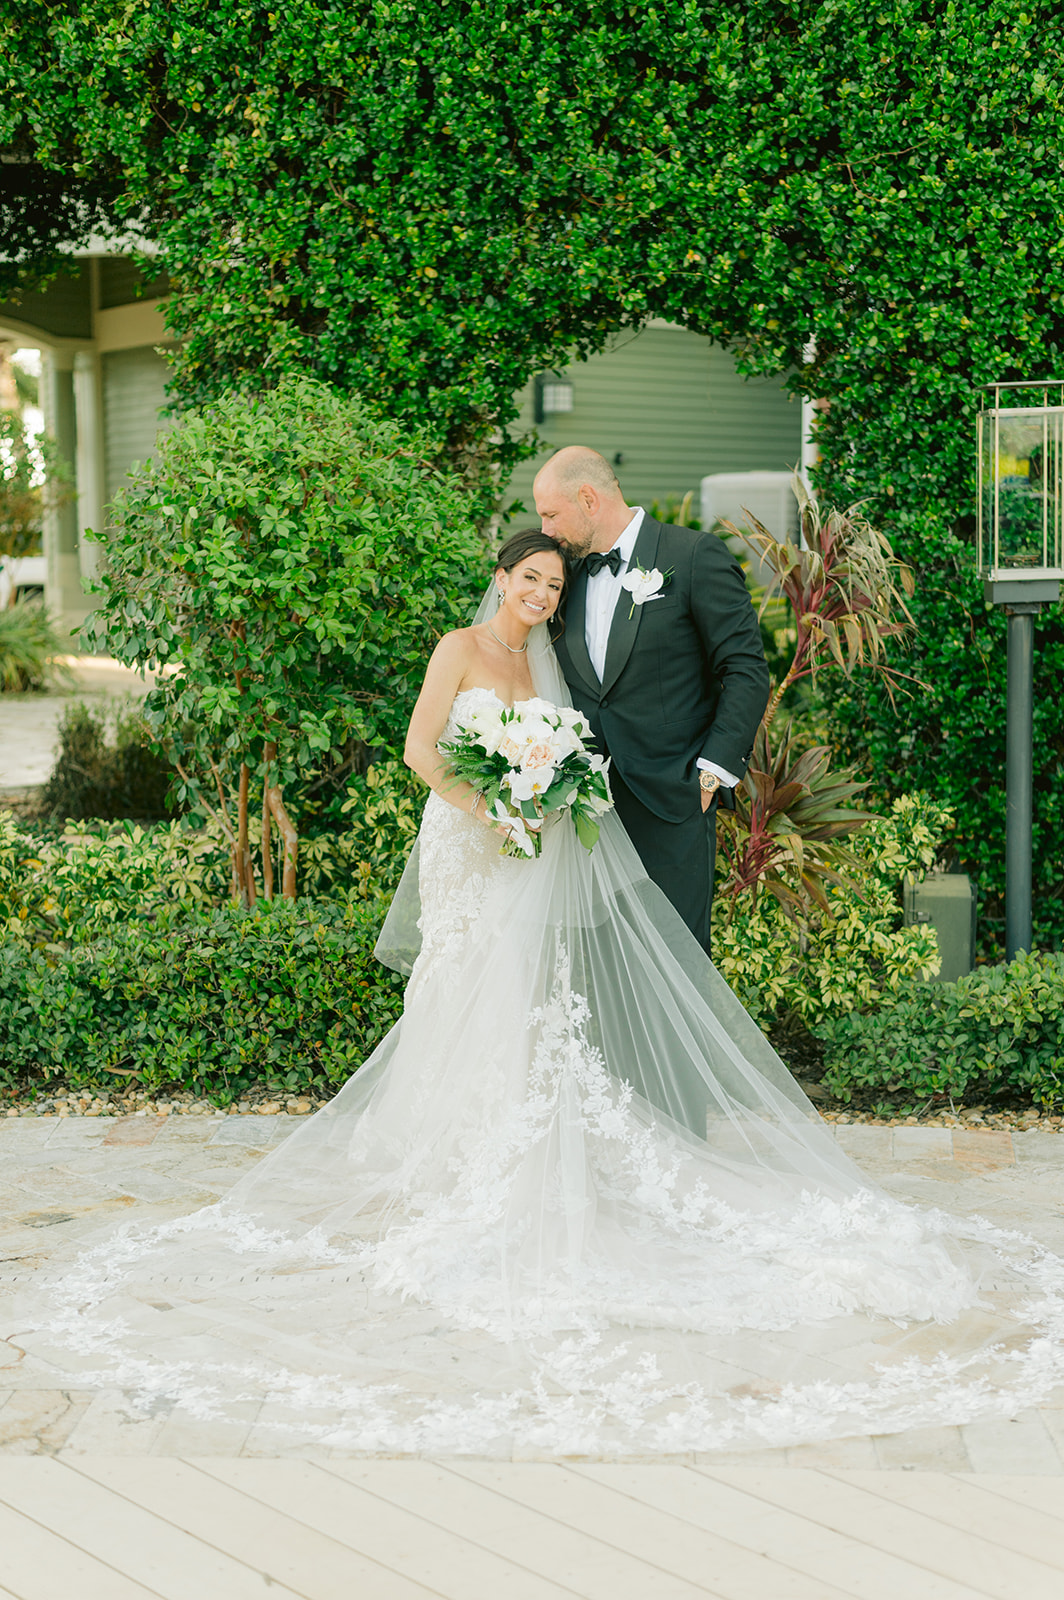 Elegant Fine Art Wedding Photography in Marco Island - A Perfect Reflection of Your Love
